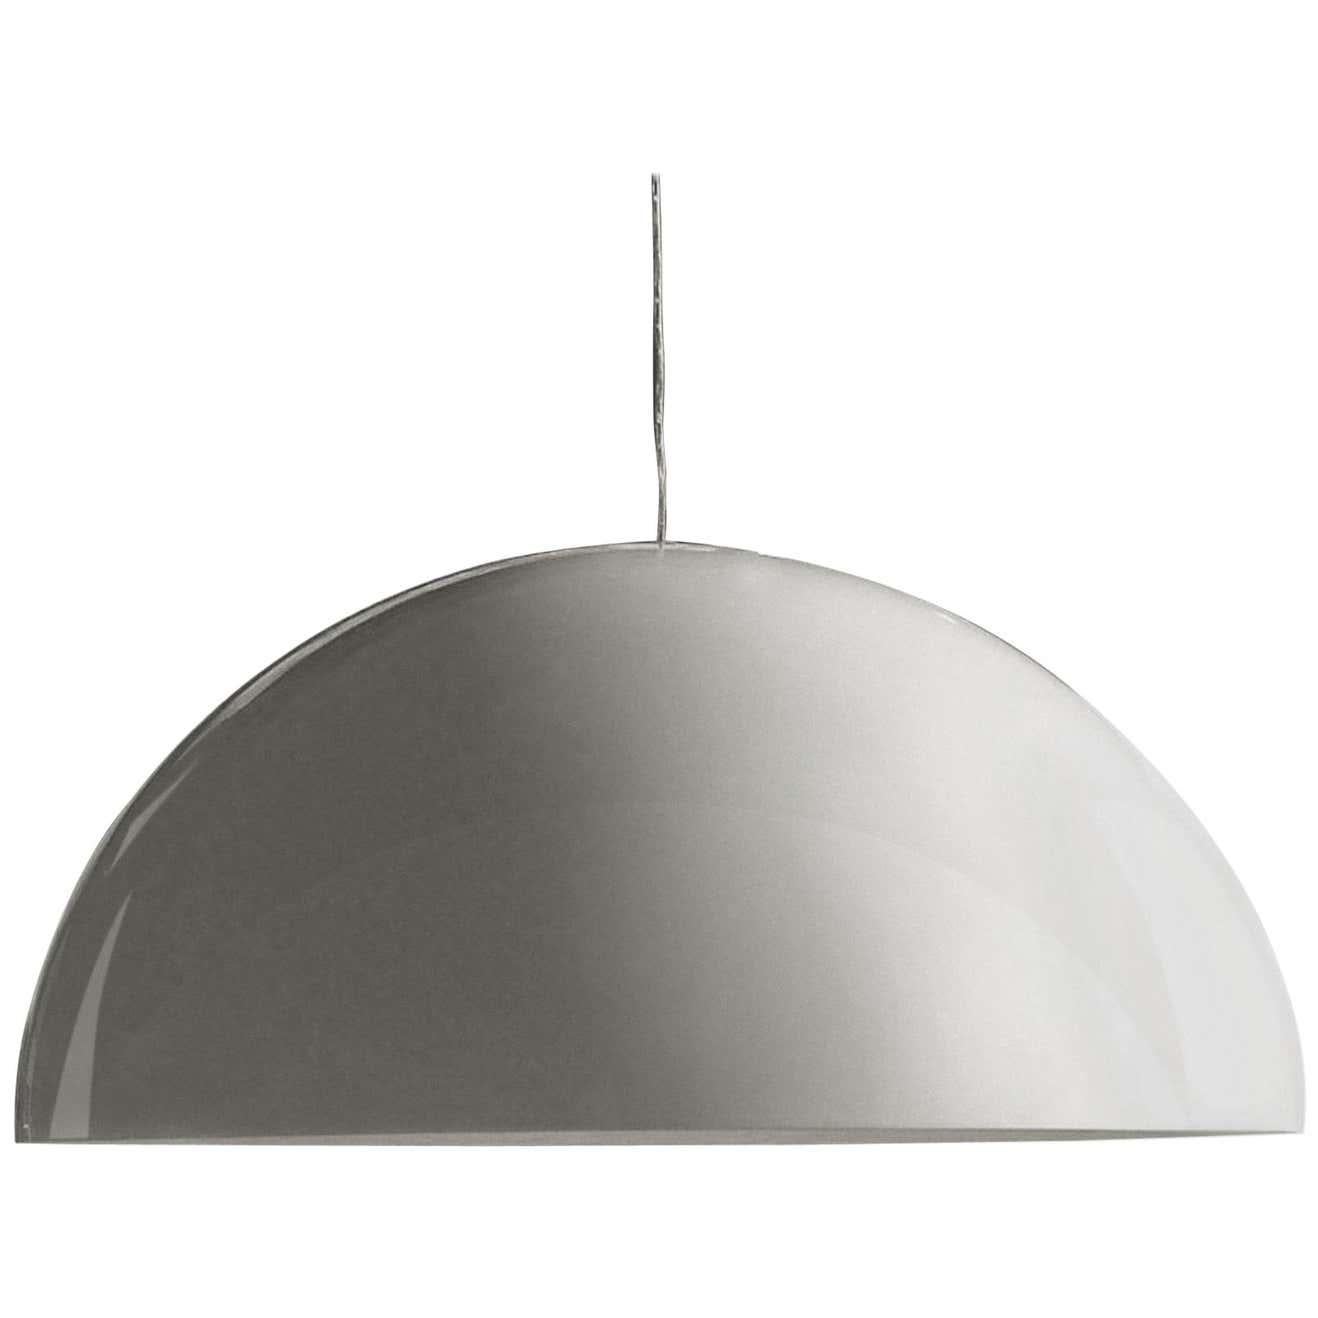 Vico Magistretti Suspension Lamp 'Sonora' 493 Painted White by Oluce In New Condition For Sale In Barcelona, Barcelona